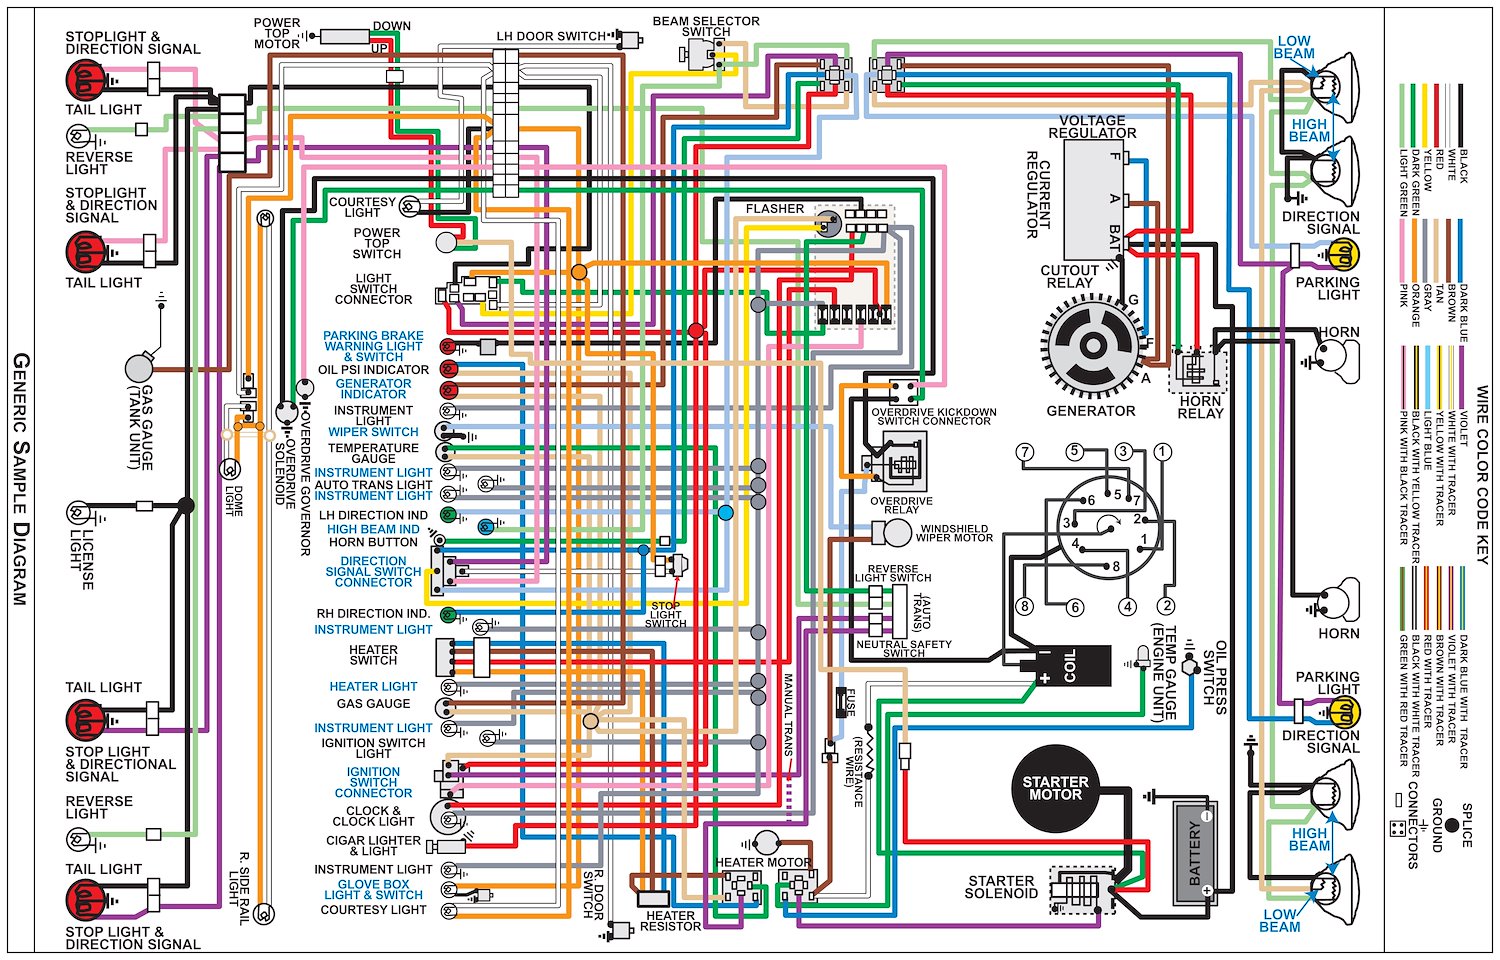 Wiring Diagram for 1972 Plymouth Barracuda with Rallye Dash, 11 in x 17 in., Laminated